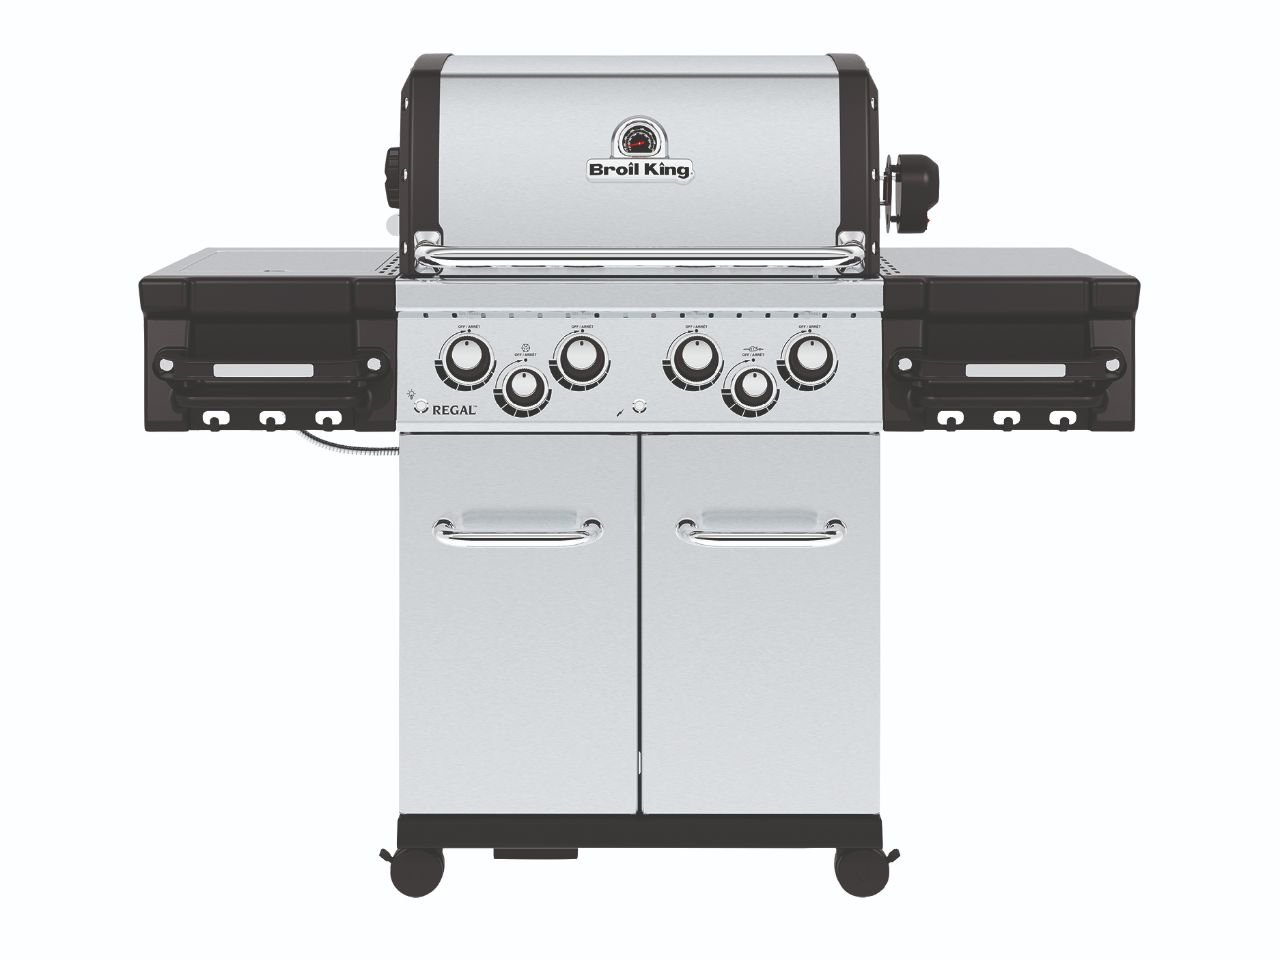 Barbecue Broil King mod. Regal